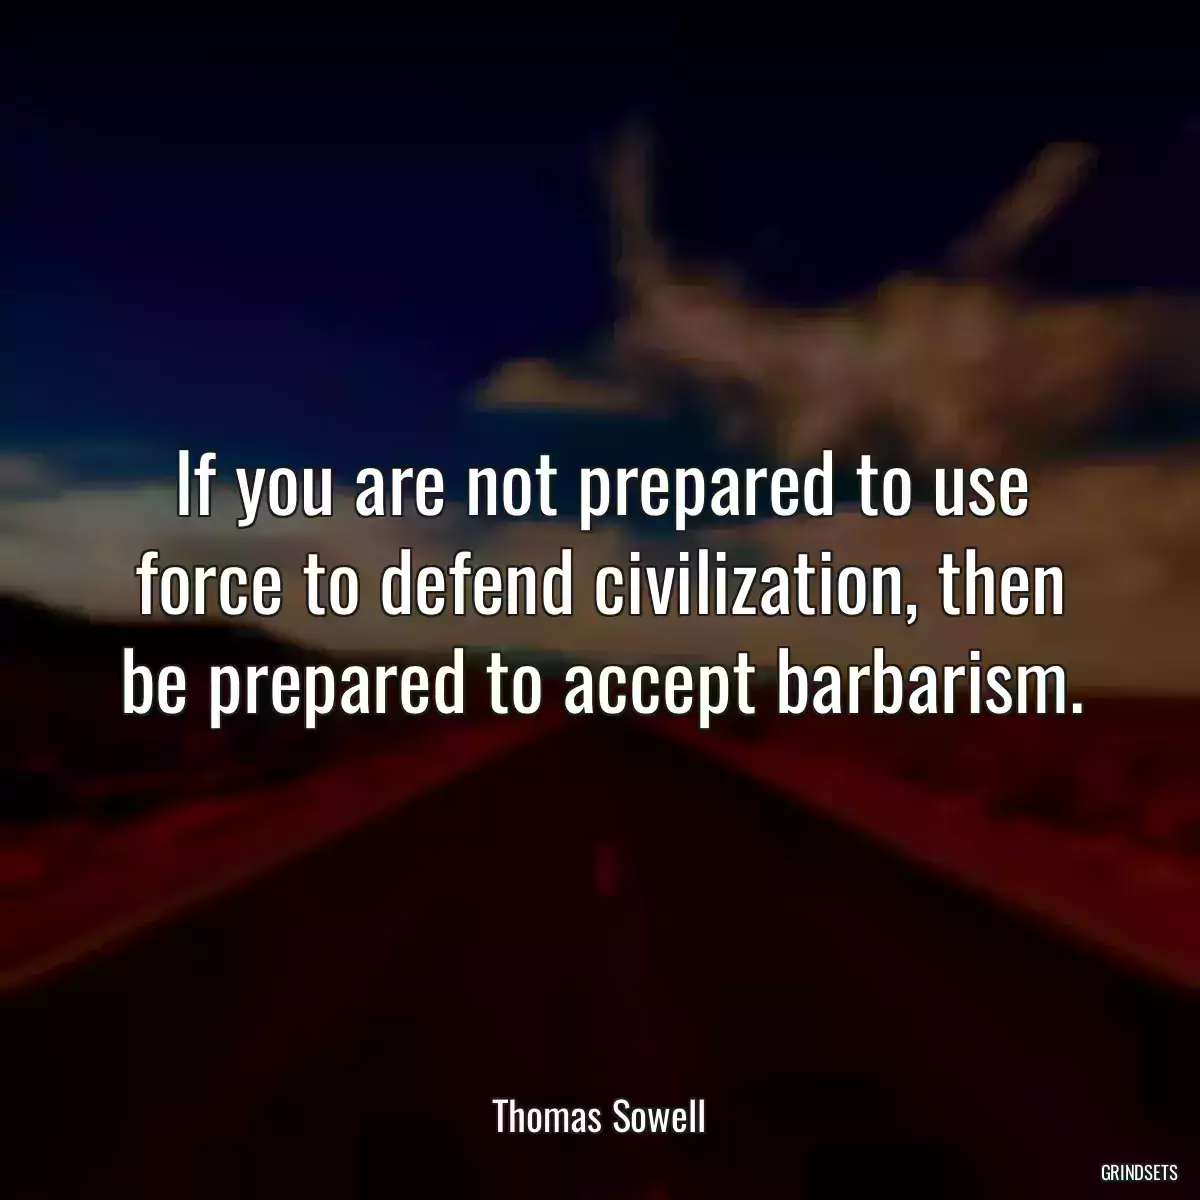 If you are not prepared to use force to defend civilization, then be prepared to accept barbarism.